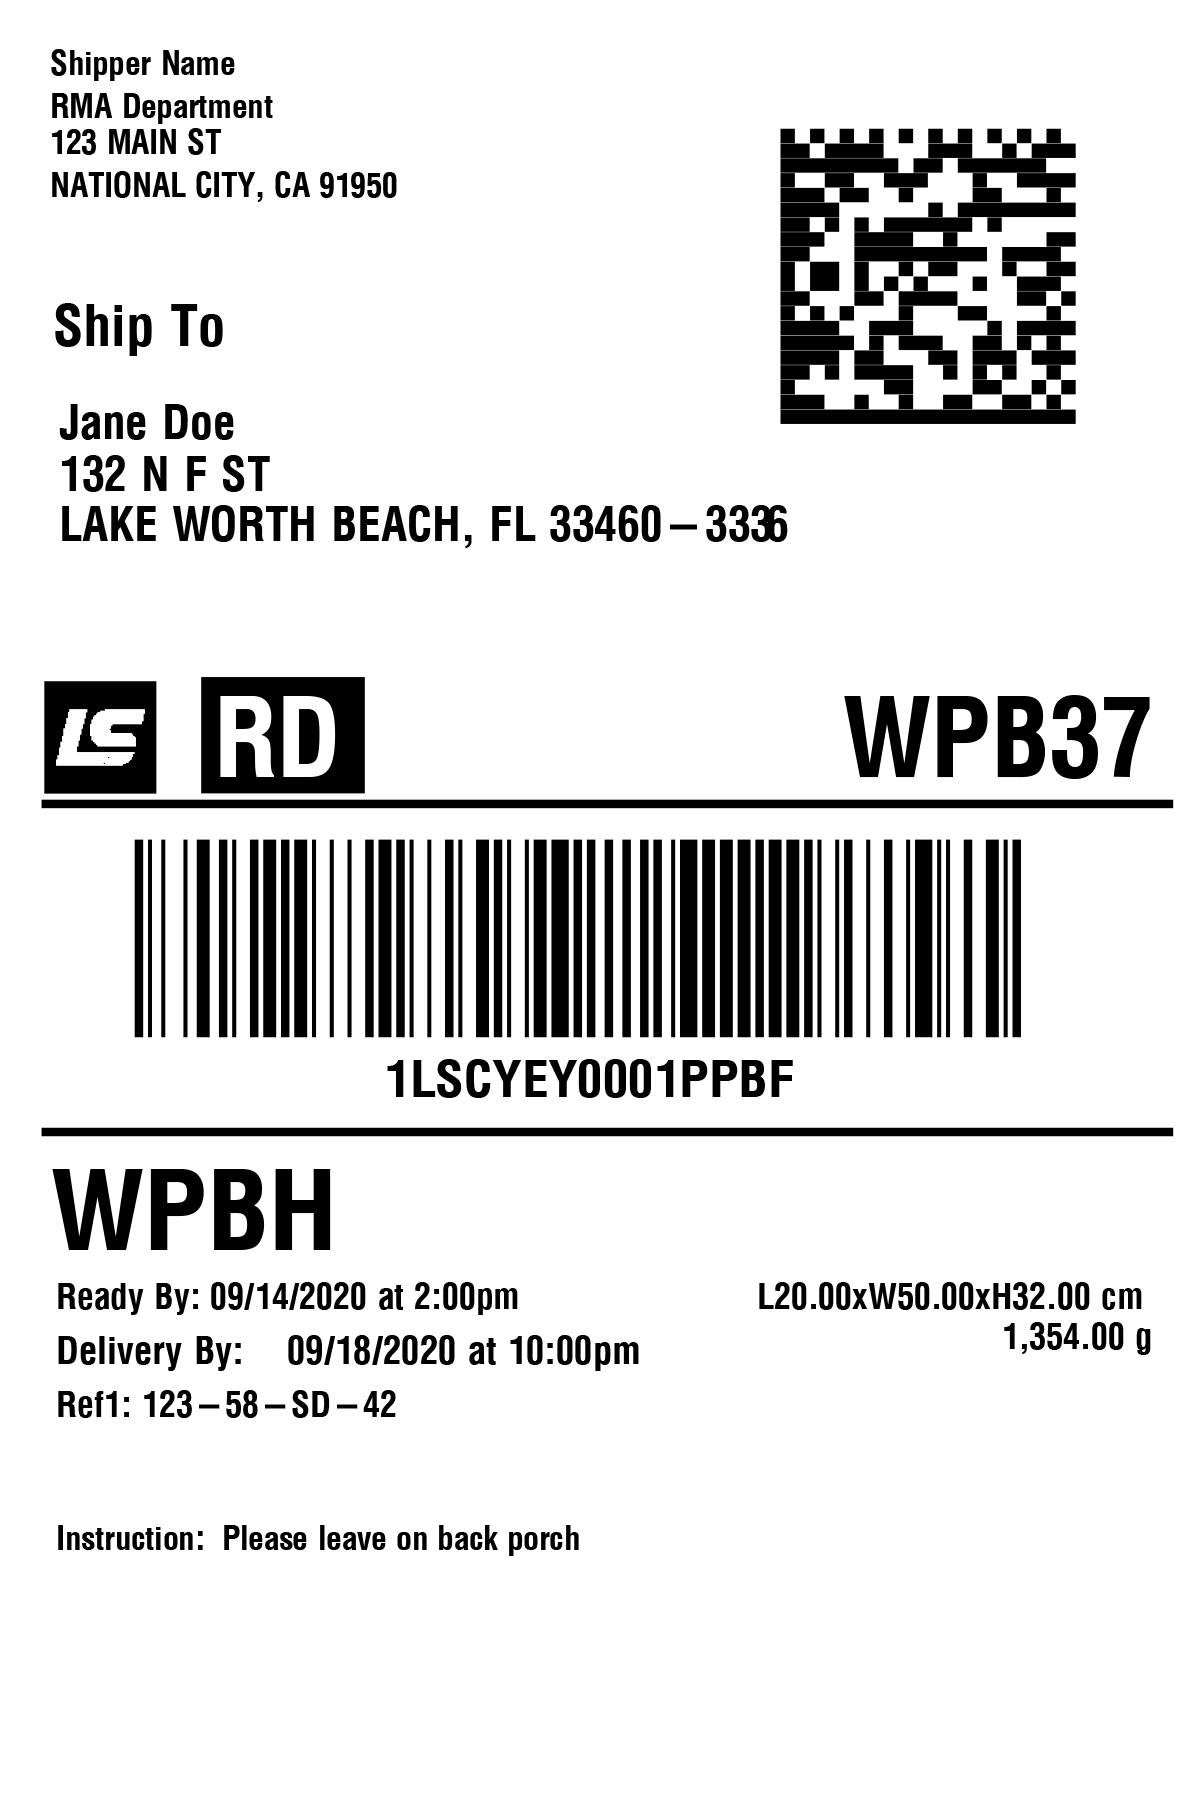 LaserShip Shipping Label Template